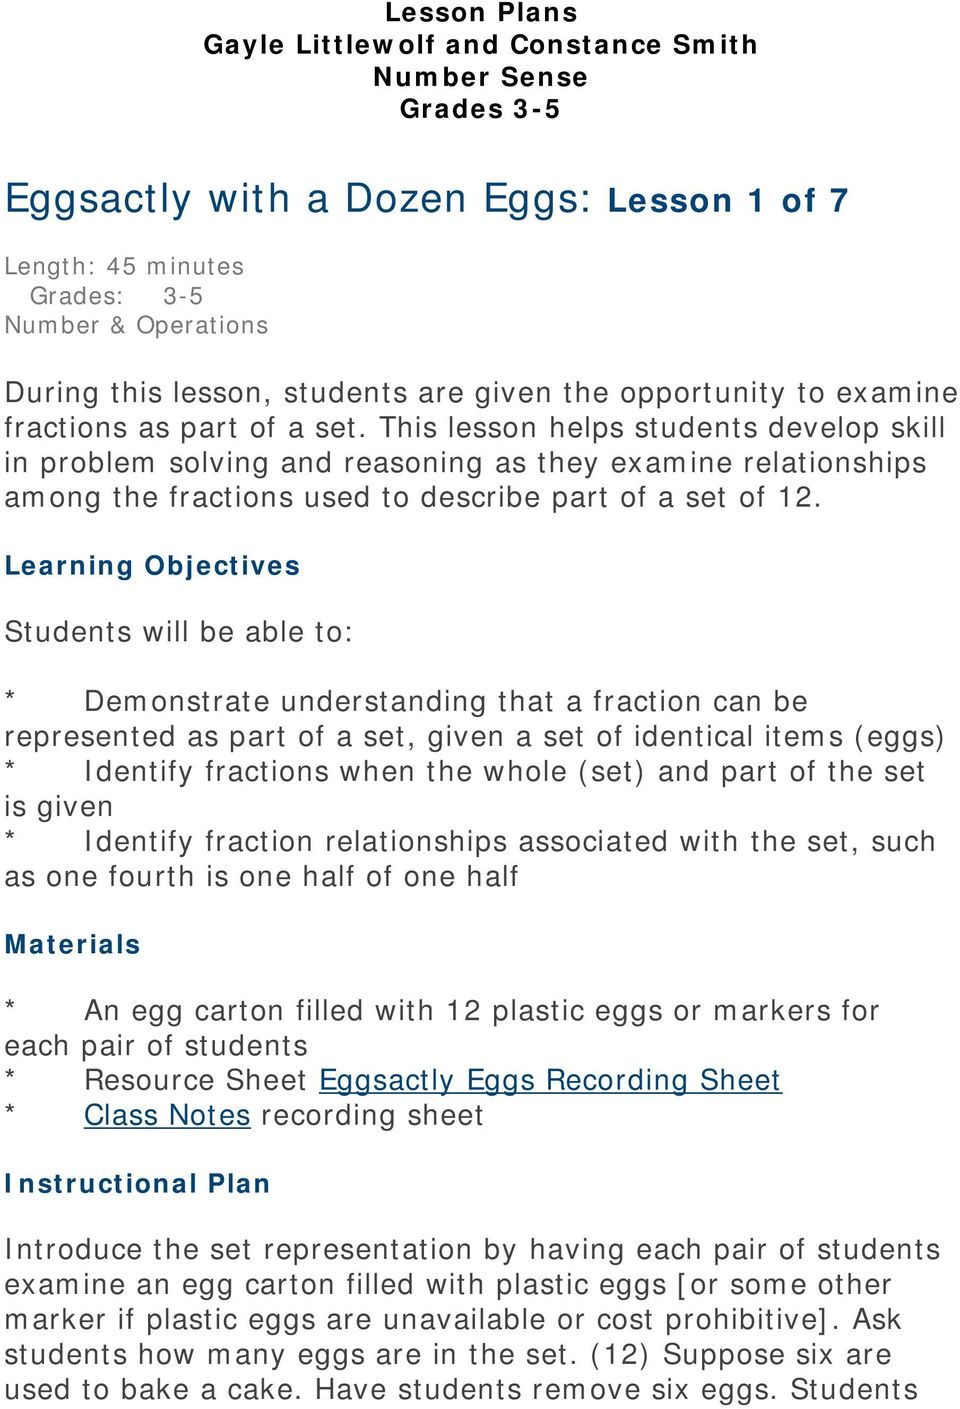 Learning Objectives Students will be able to: * Demonstrate understanding that a fraction can be represented as part of a set, given a set of identical items (eggs) * Identify fractions when the